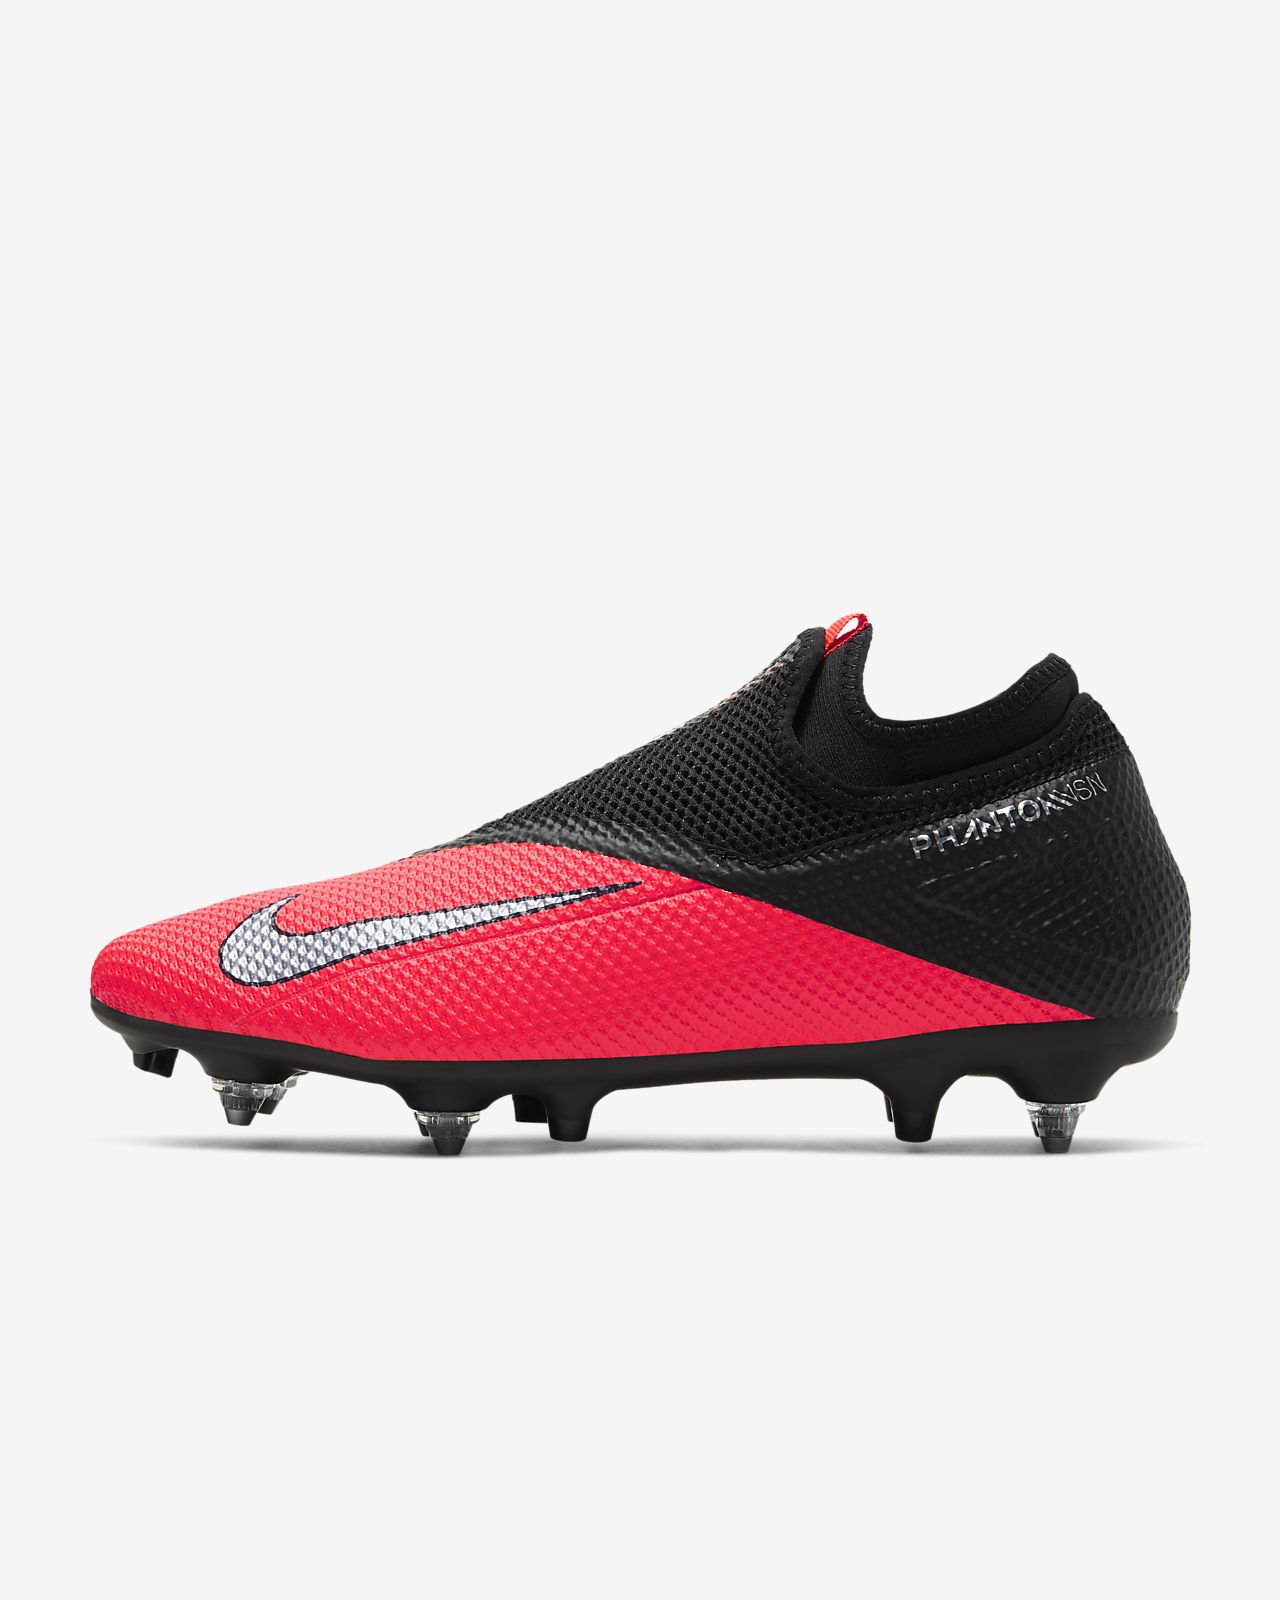 soccer cleats under 40 dollars